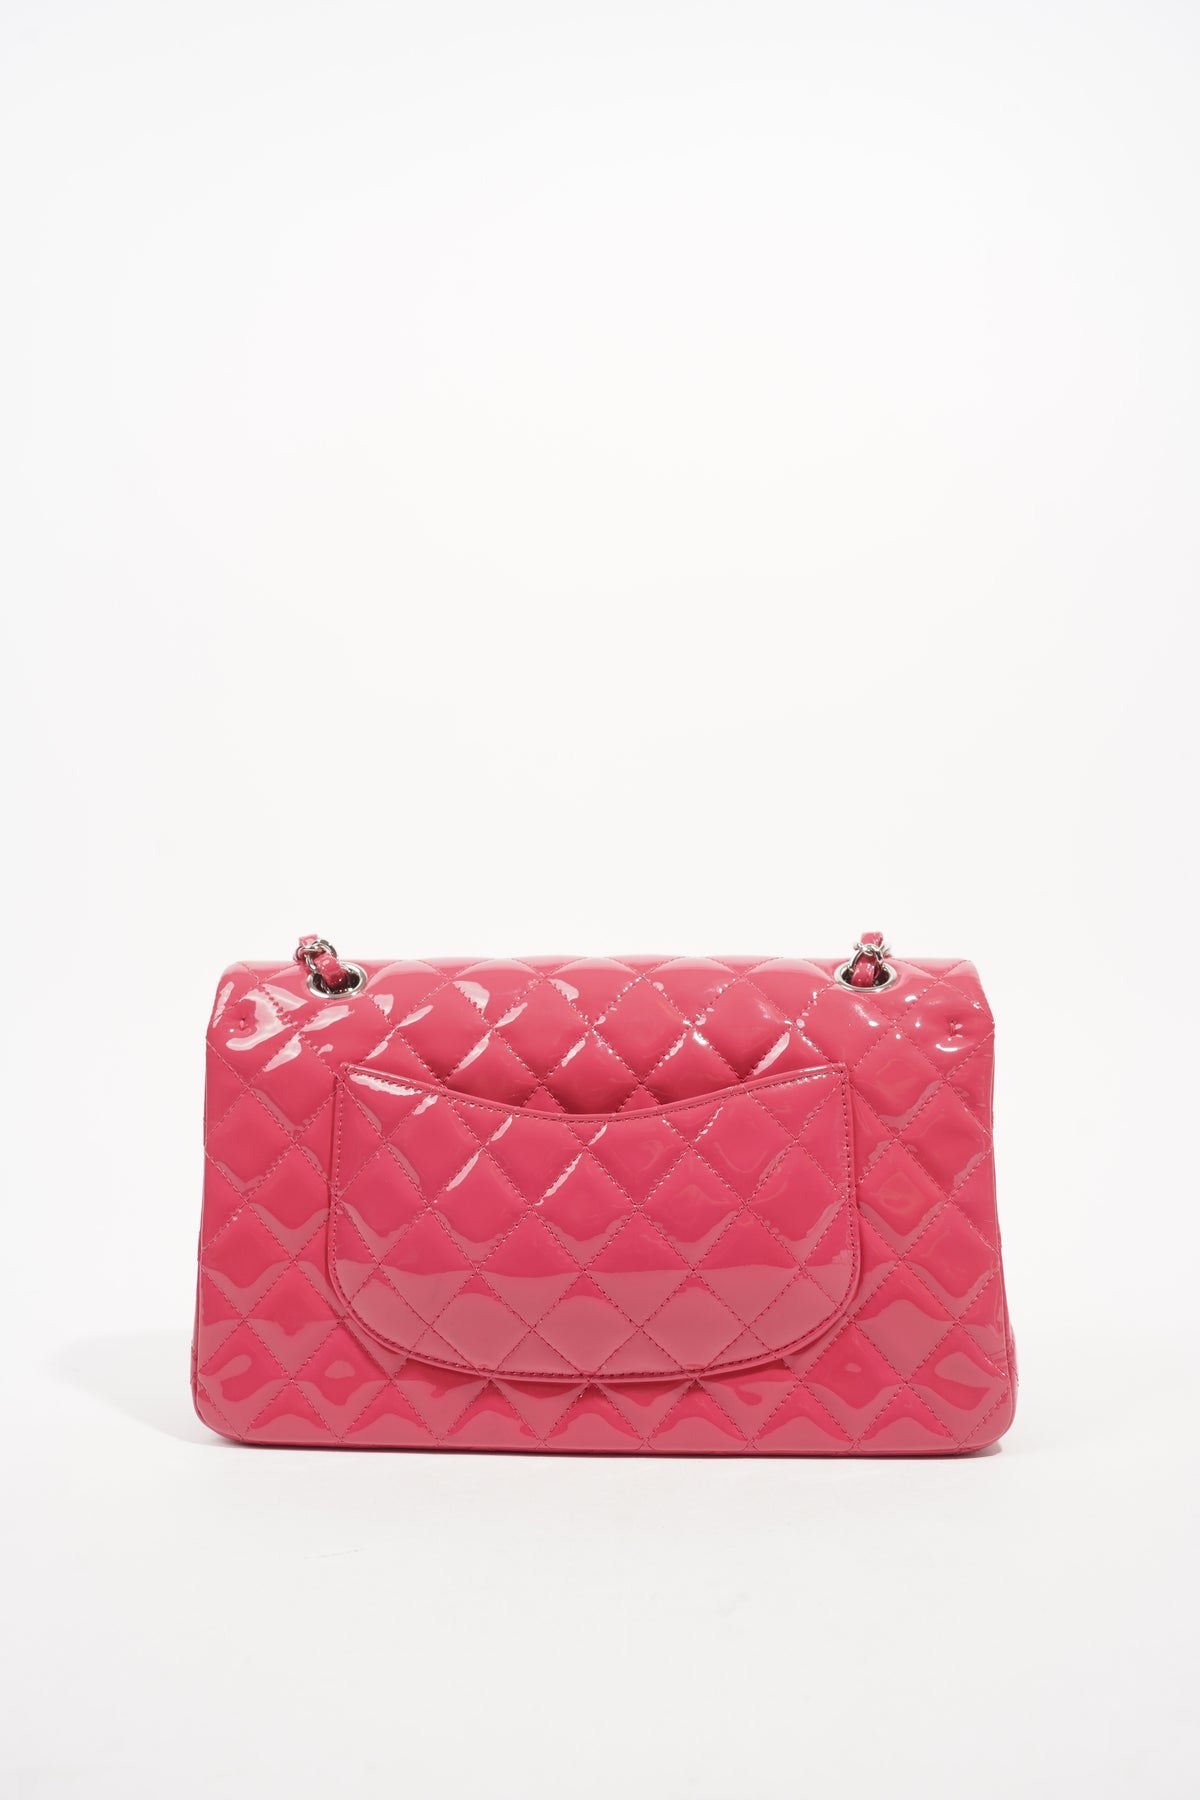 Chanel Bicolor Classic Double Flap Bag Quilted Patent Medium in